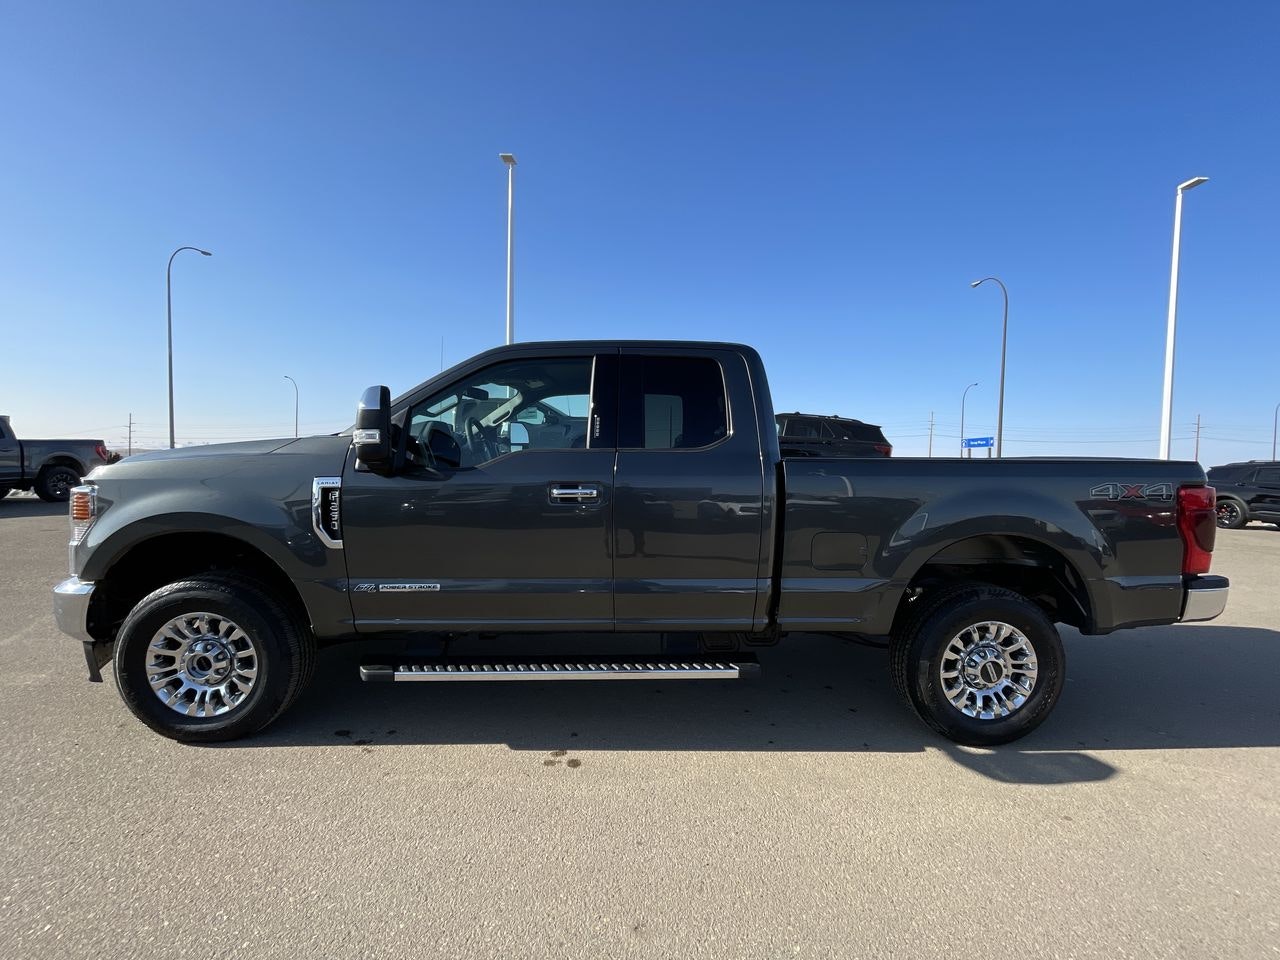 2020 Ford Super Duty F-250 SRW Lariat with only 100KM (U4390) Main Image